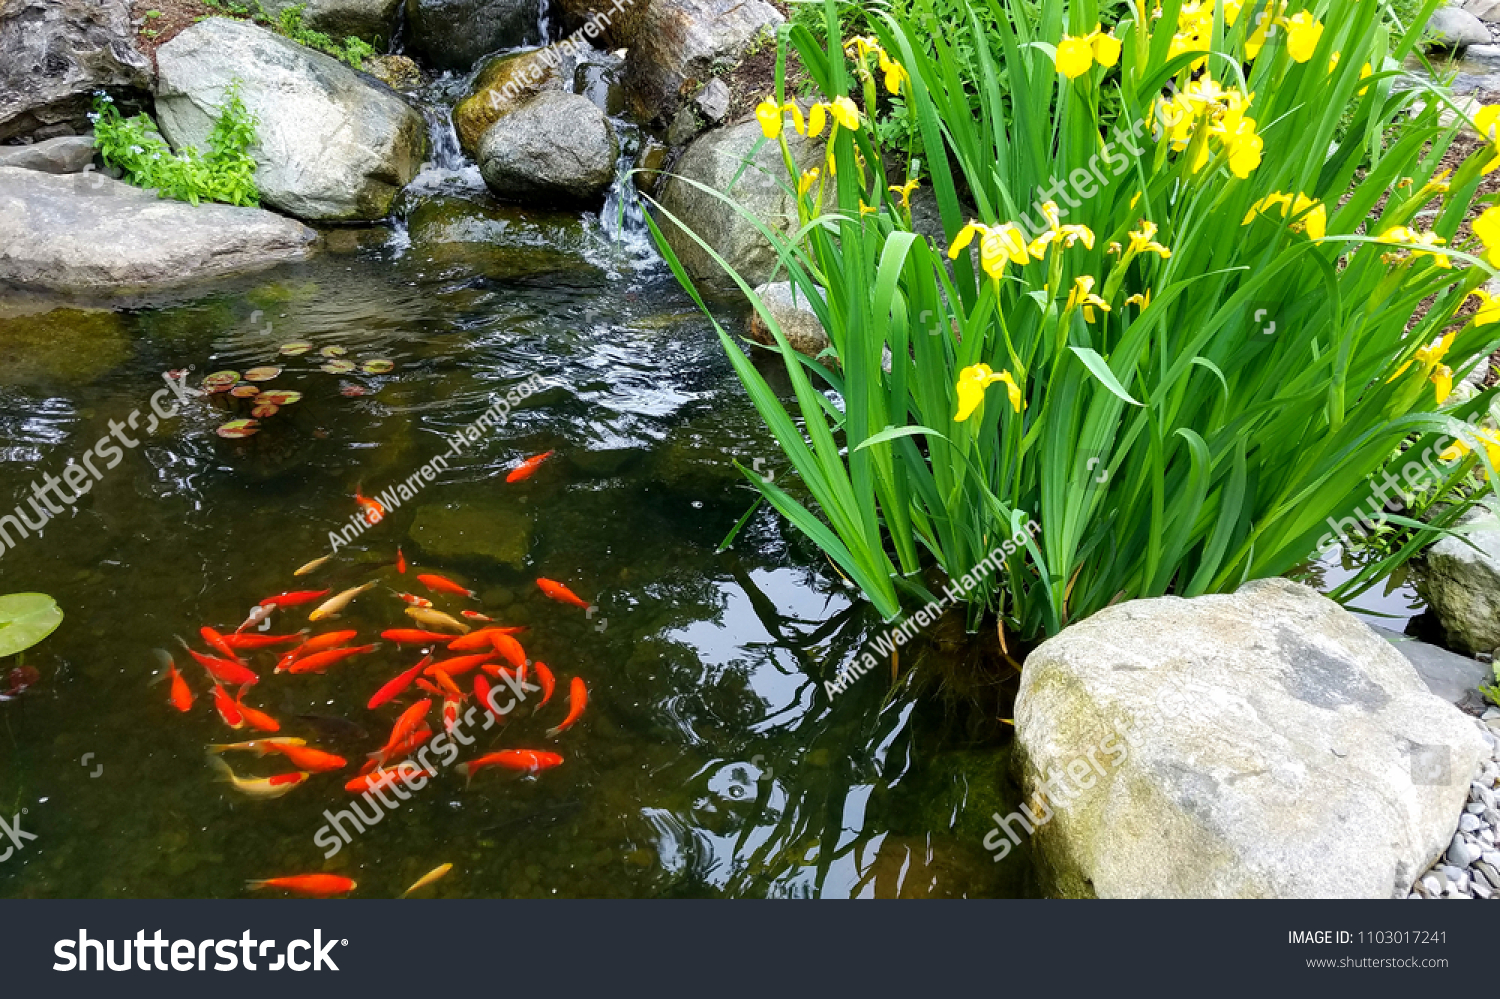 Koi Fish Pond; Decorative Orange Koi Fish Swimming in a Circular Fashion in a Pond Near Surface with Yellow Irises Nearby; Design Elements, Landscaping and Water Feature Ideas.  #1103017241